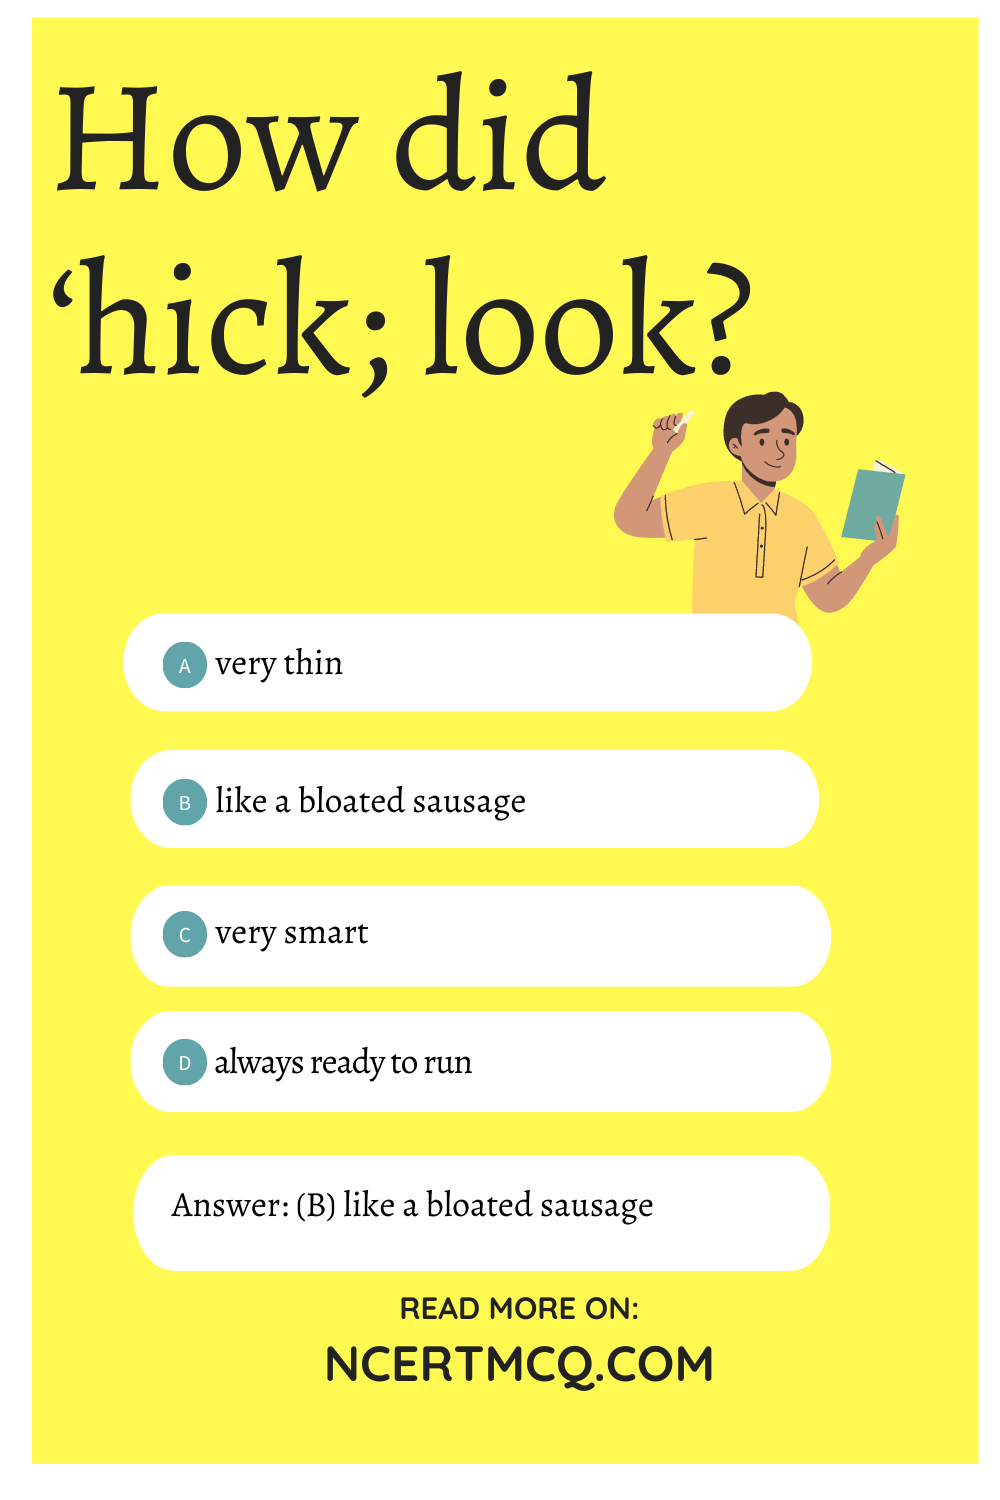 How did ‘hick; look?